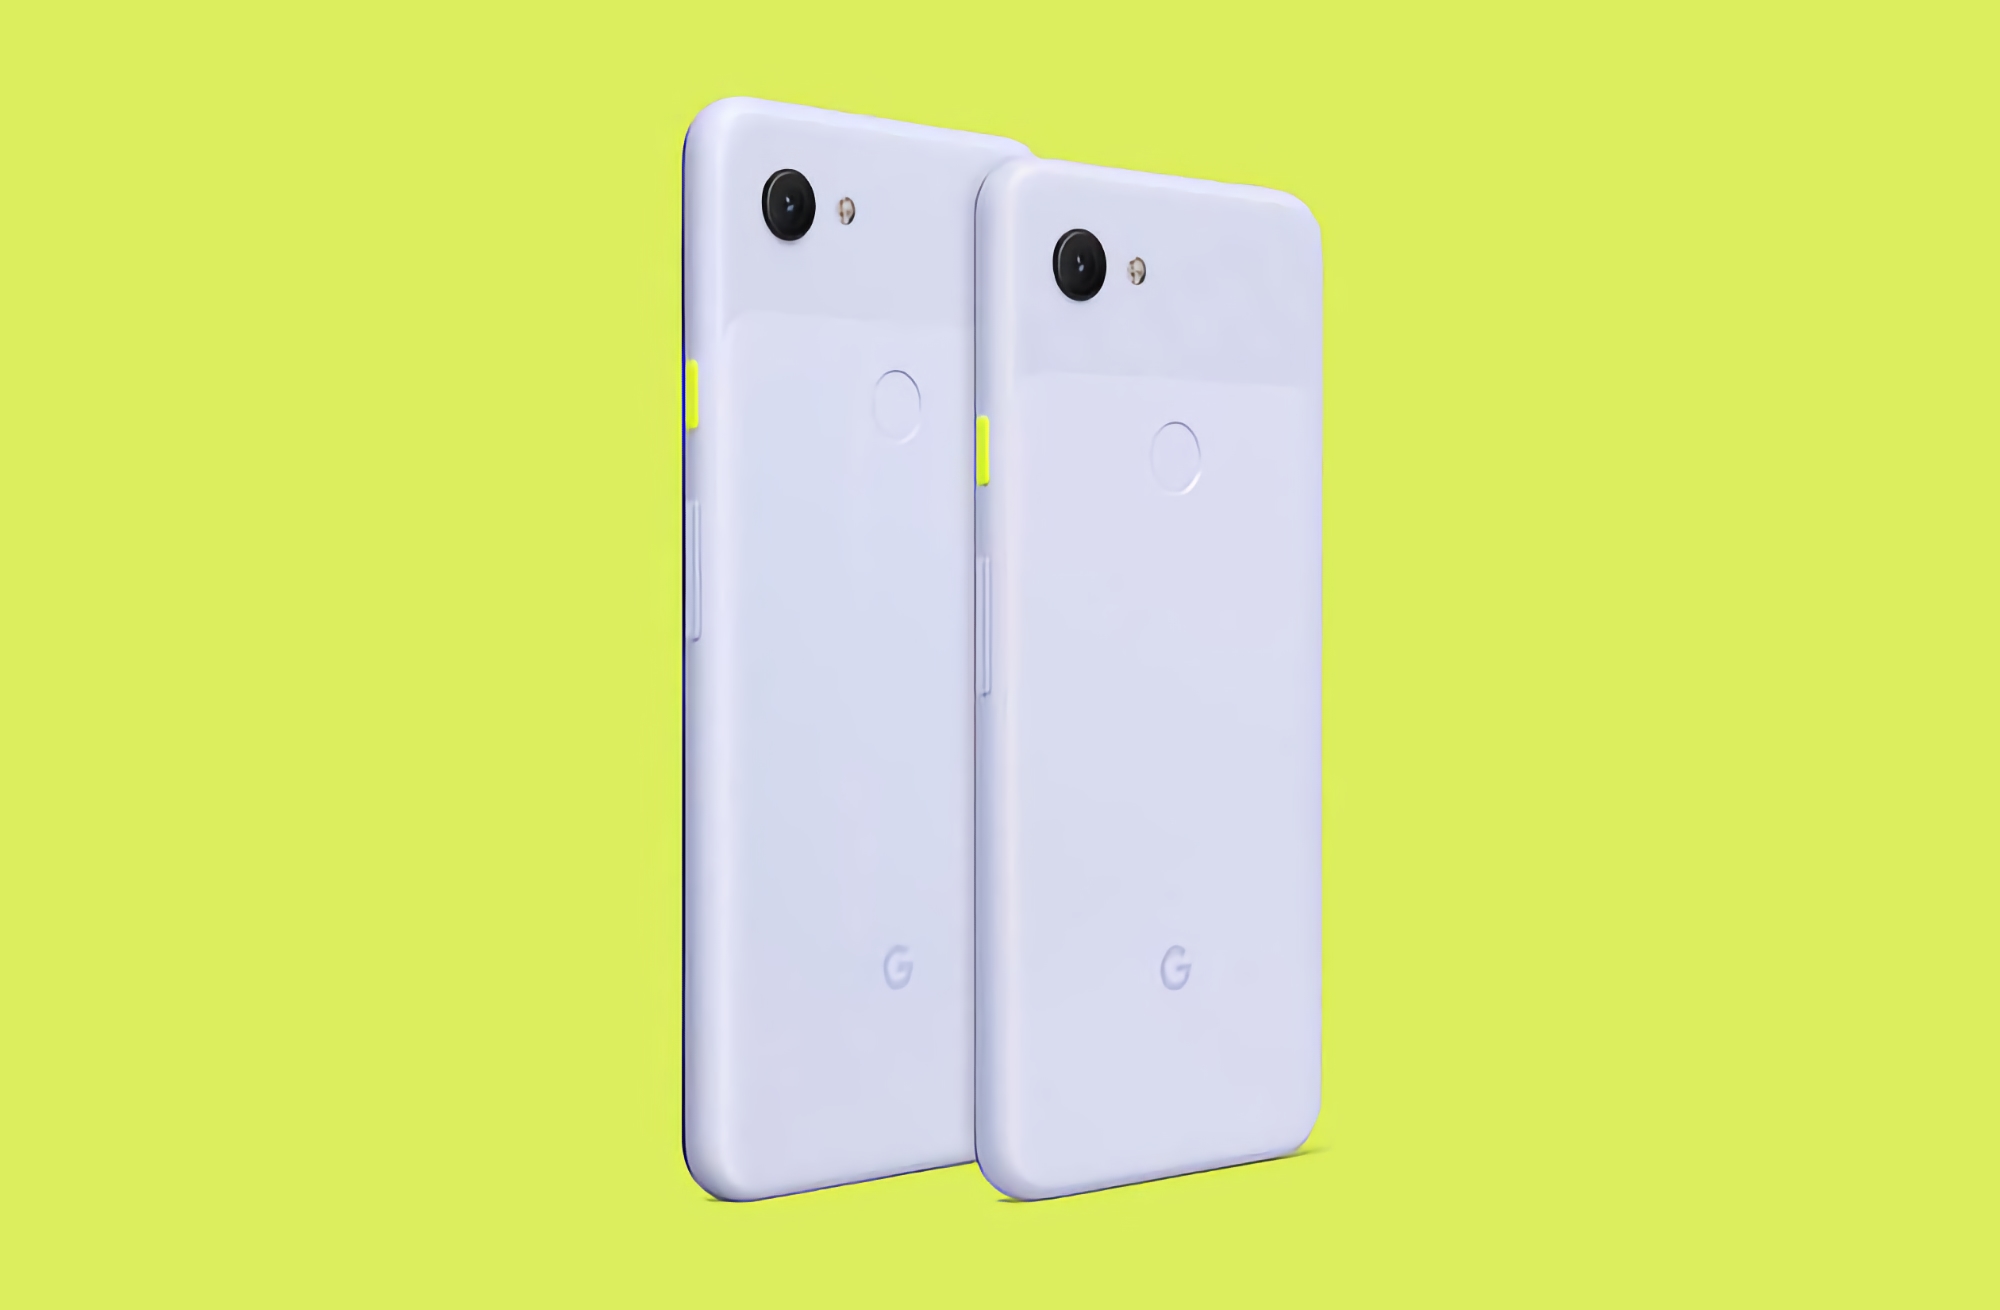 Pixel 3a and Pixel 3a XL received the latest Android 12.1 update